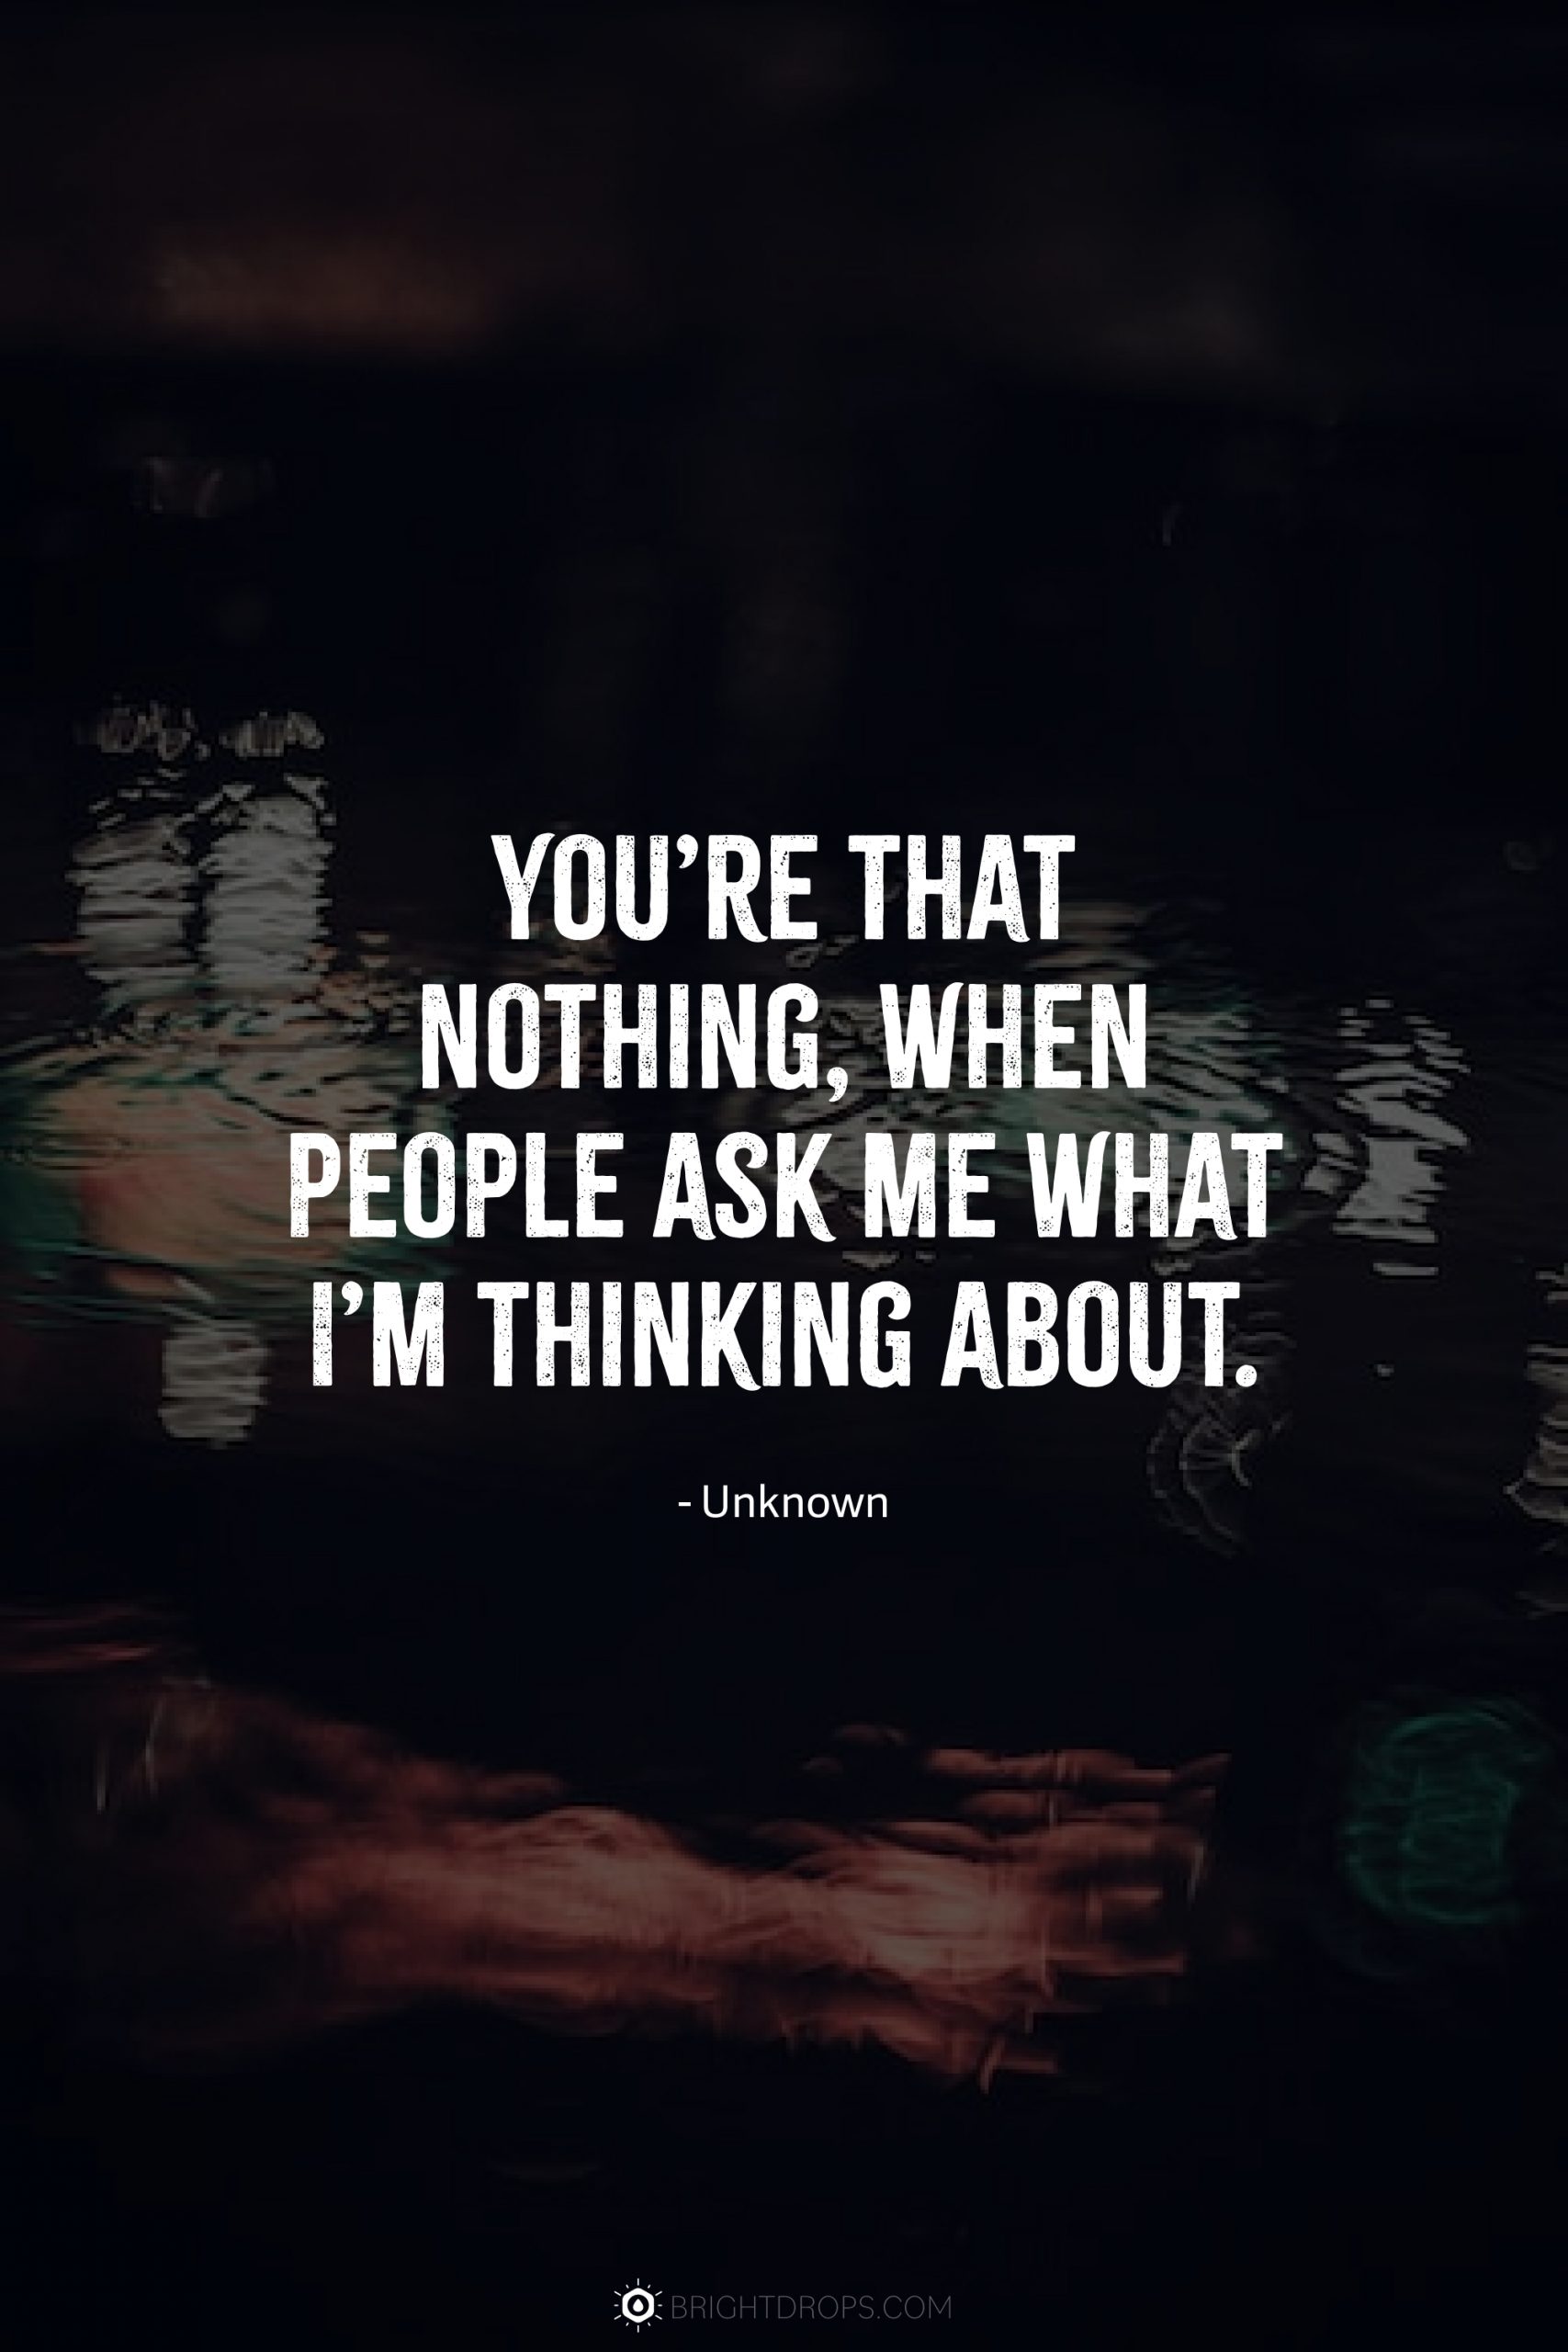 You’re that nothing, when people ask me what I’m thinking about.